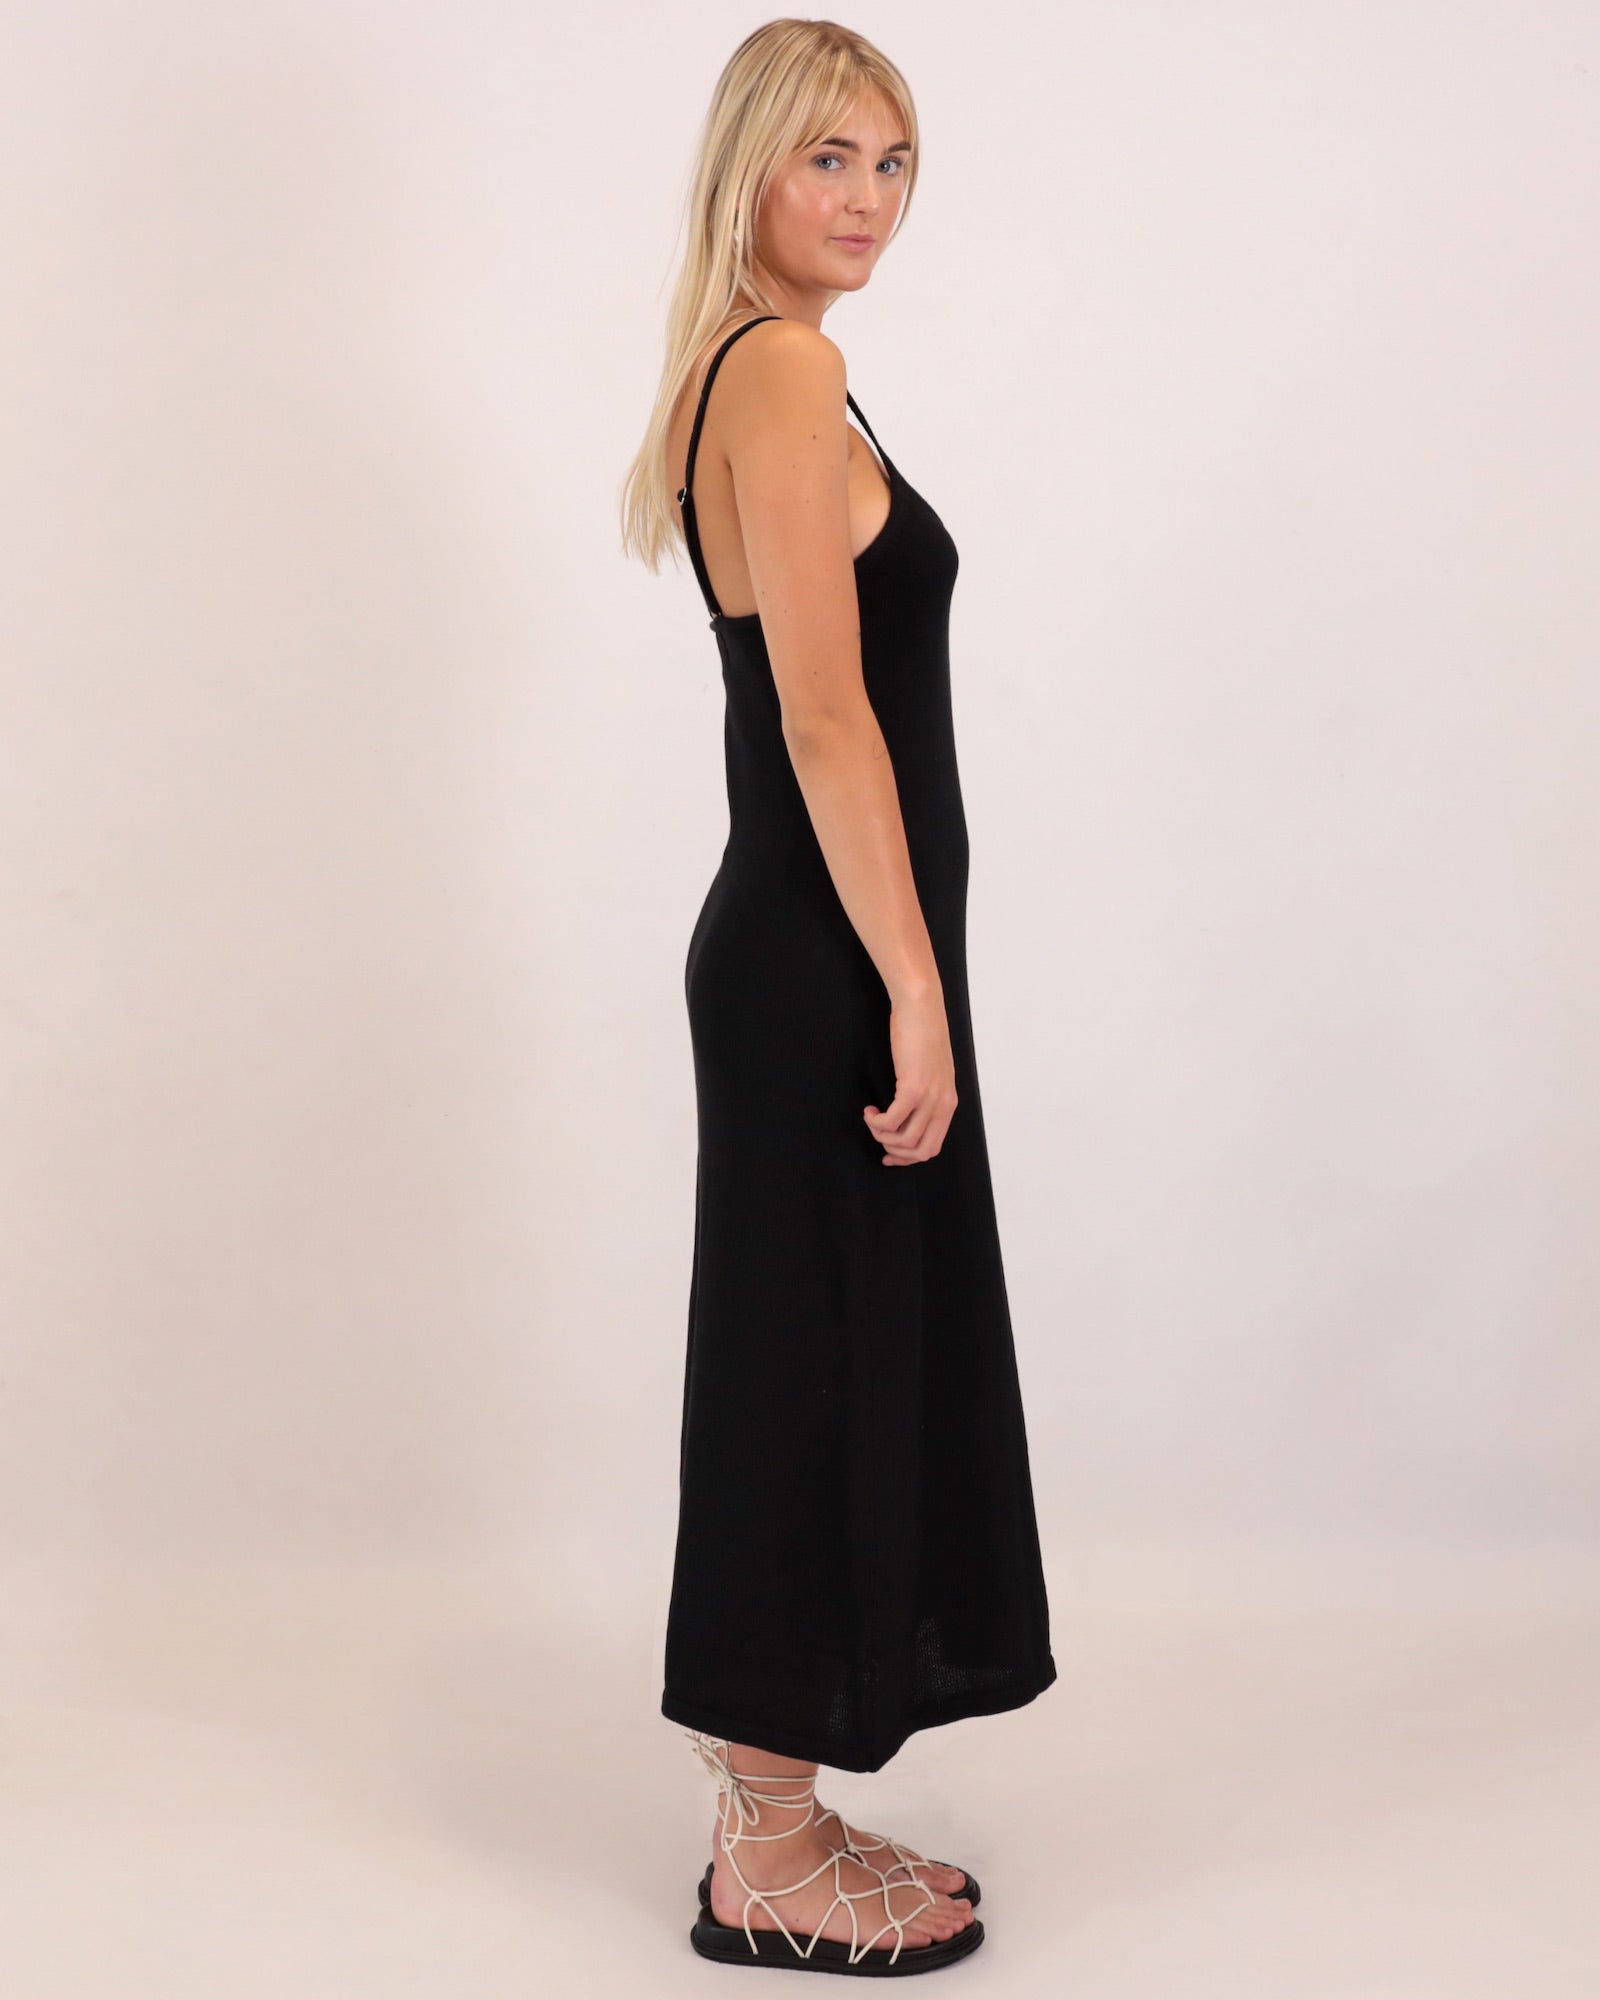 The Mabel Knit Dress in Black